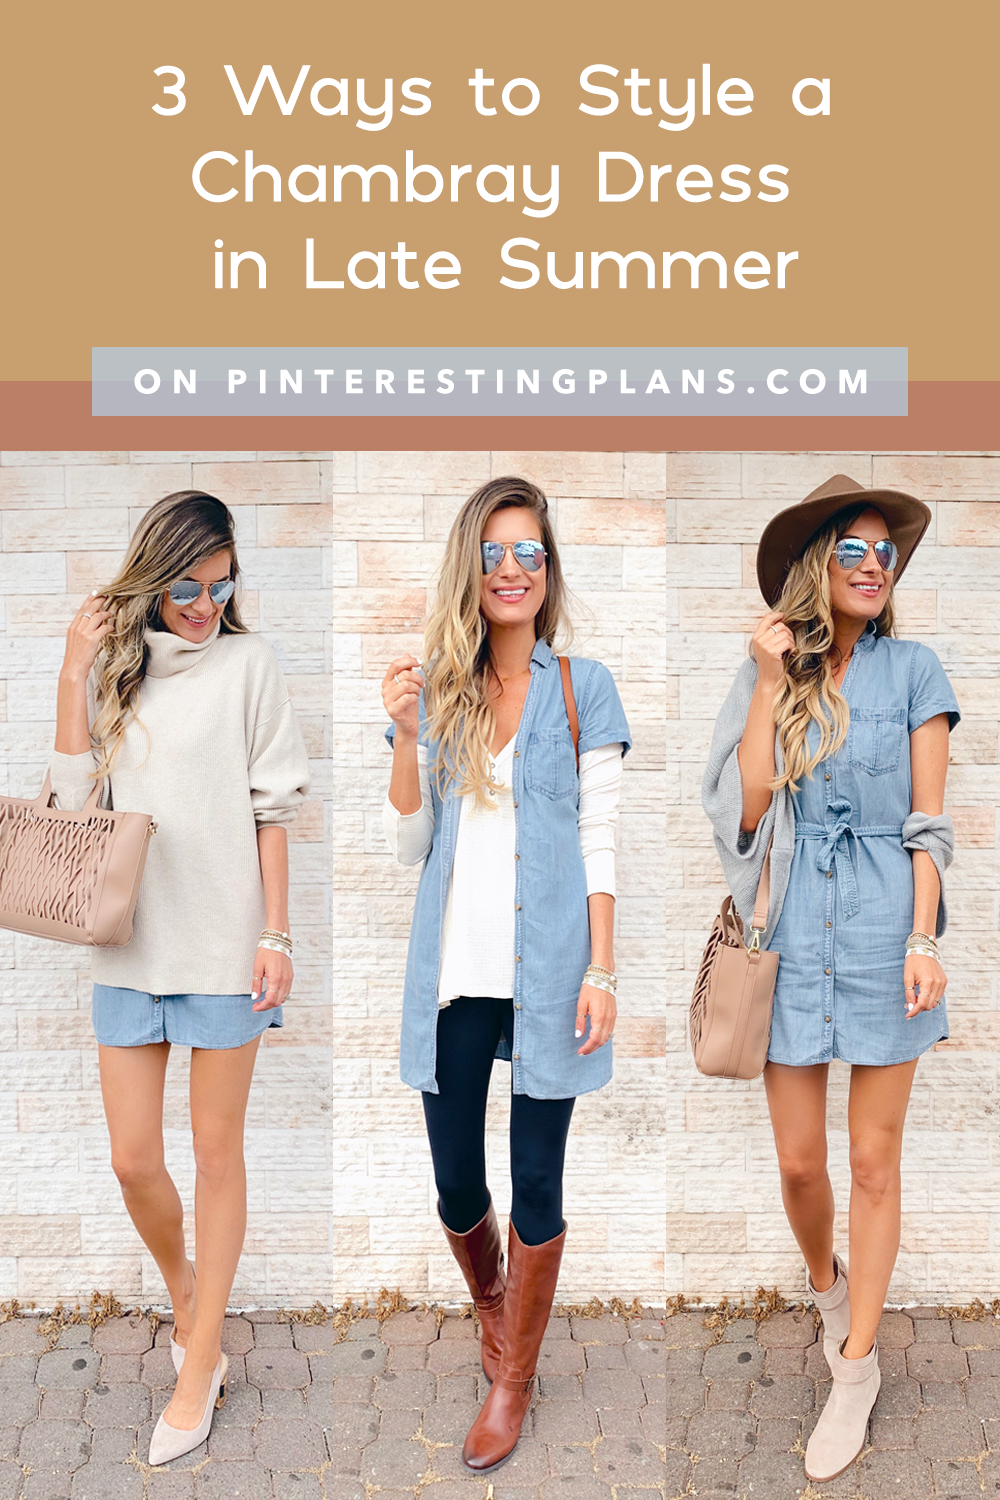 how to style a chambray dress for late summer and fall - pinteresting plans connecticut lifestyle blog